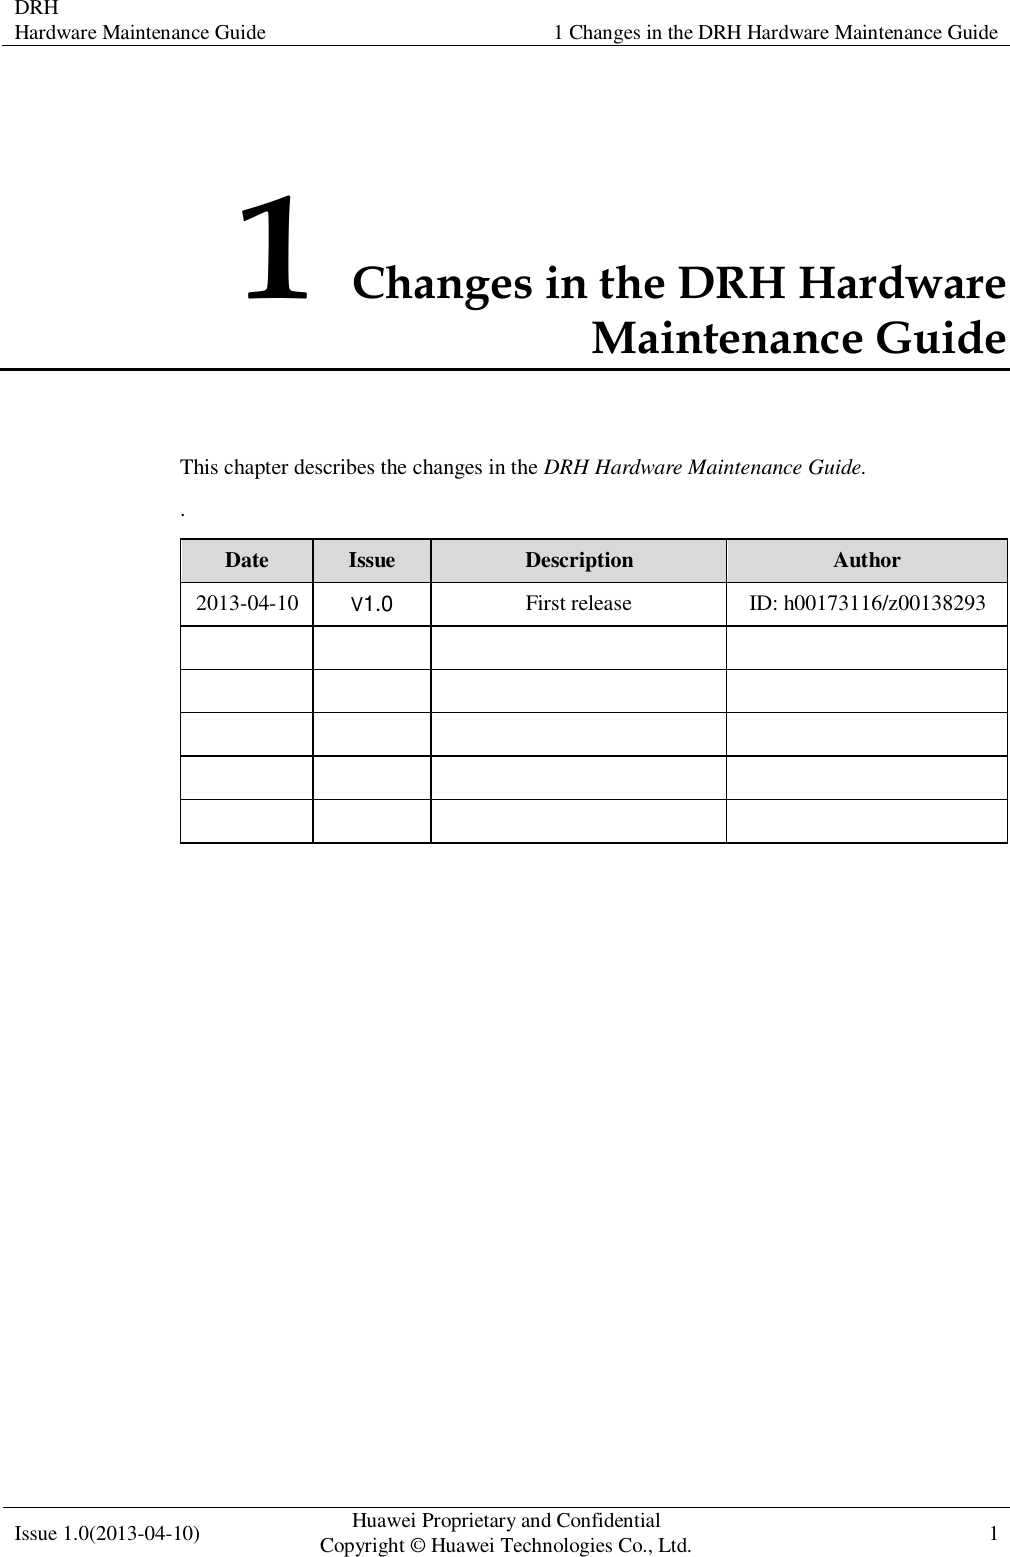  DRH Hardware Maintenance Guide   1 Changes in the DRH Hardware Maintenance Guide  Issue 1.0(2013-04-10) Huawei Proprietary and Confidential                                     Copyright © Huawei Technologies Co., Ltd. 1    1 Changes in the DRH Hardware Maintenance Guide This chapter describes the changes in the DRH Hardware Maintenance Guide. . Date Issue Description Author 2013-04-10 V1.0 First release ID: h00173116/z00138293                                